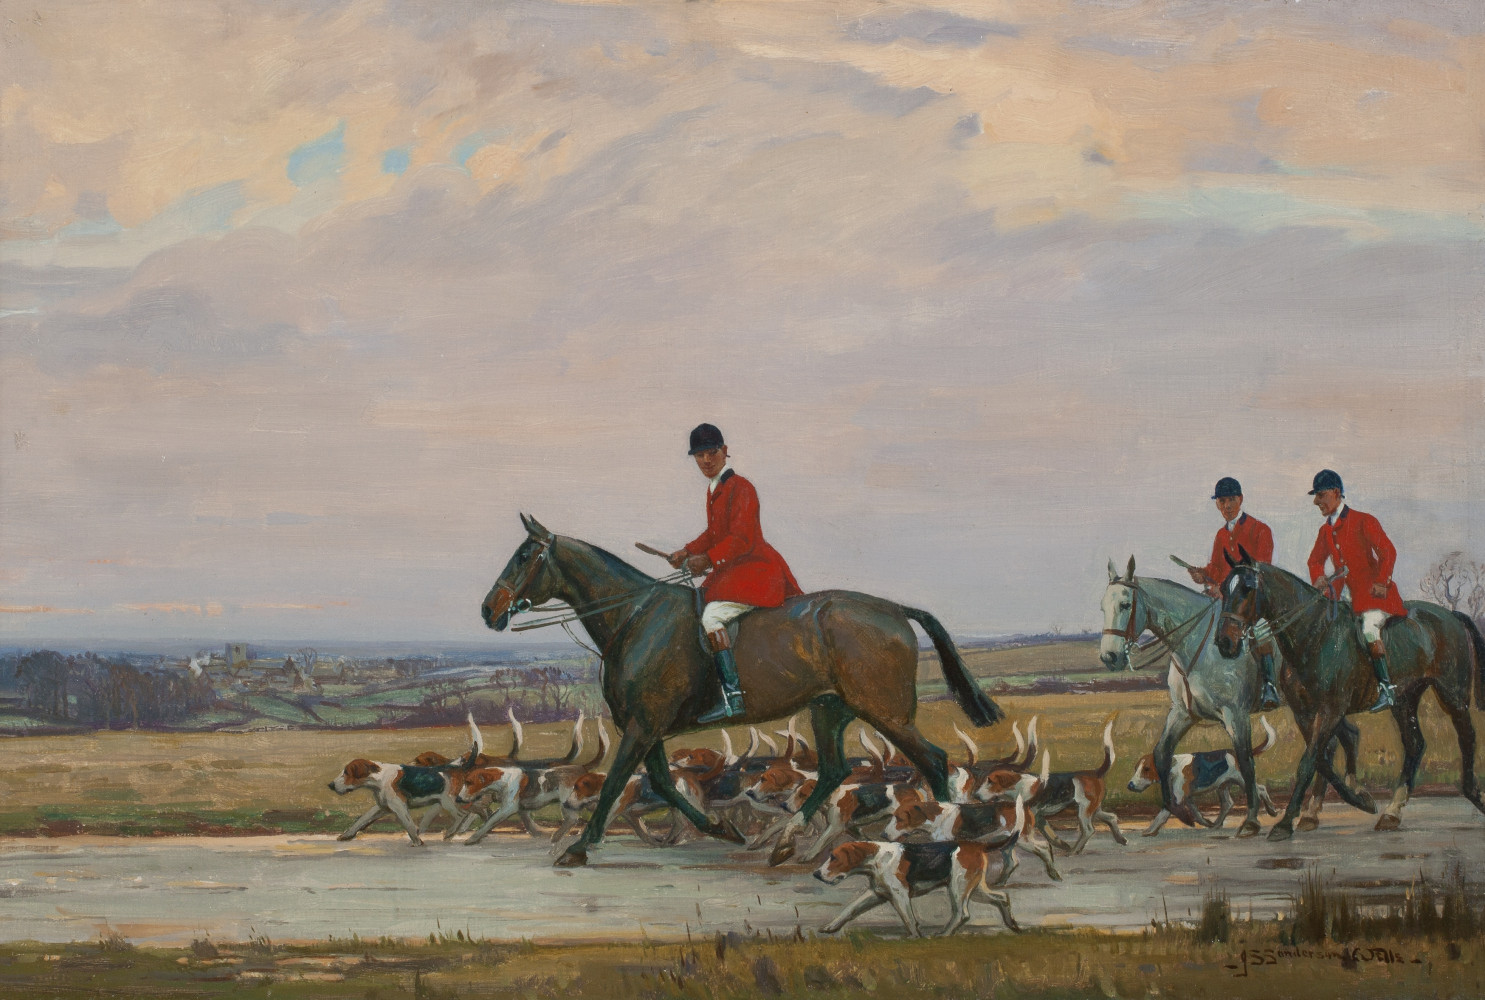 Jogging Home, c. 1920, By John Sanderson Wells (British, 1872 - 1943); Oil on canvas; 24 x 16 inches; Image courtesy of Penkhus Collection